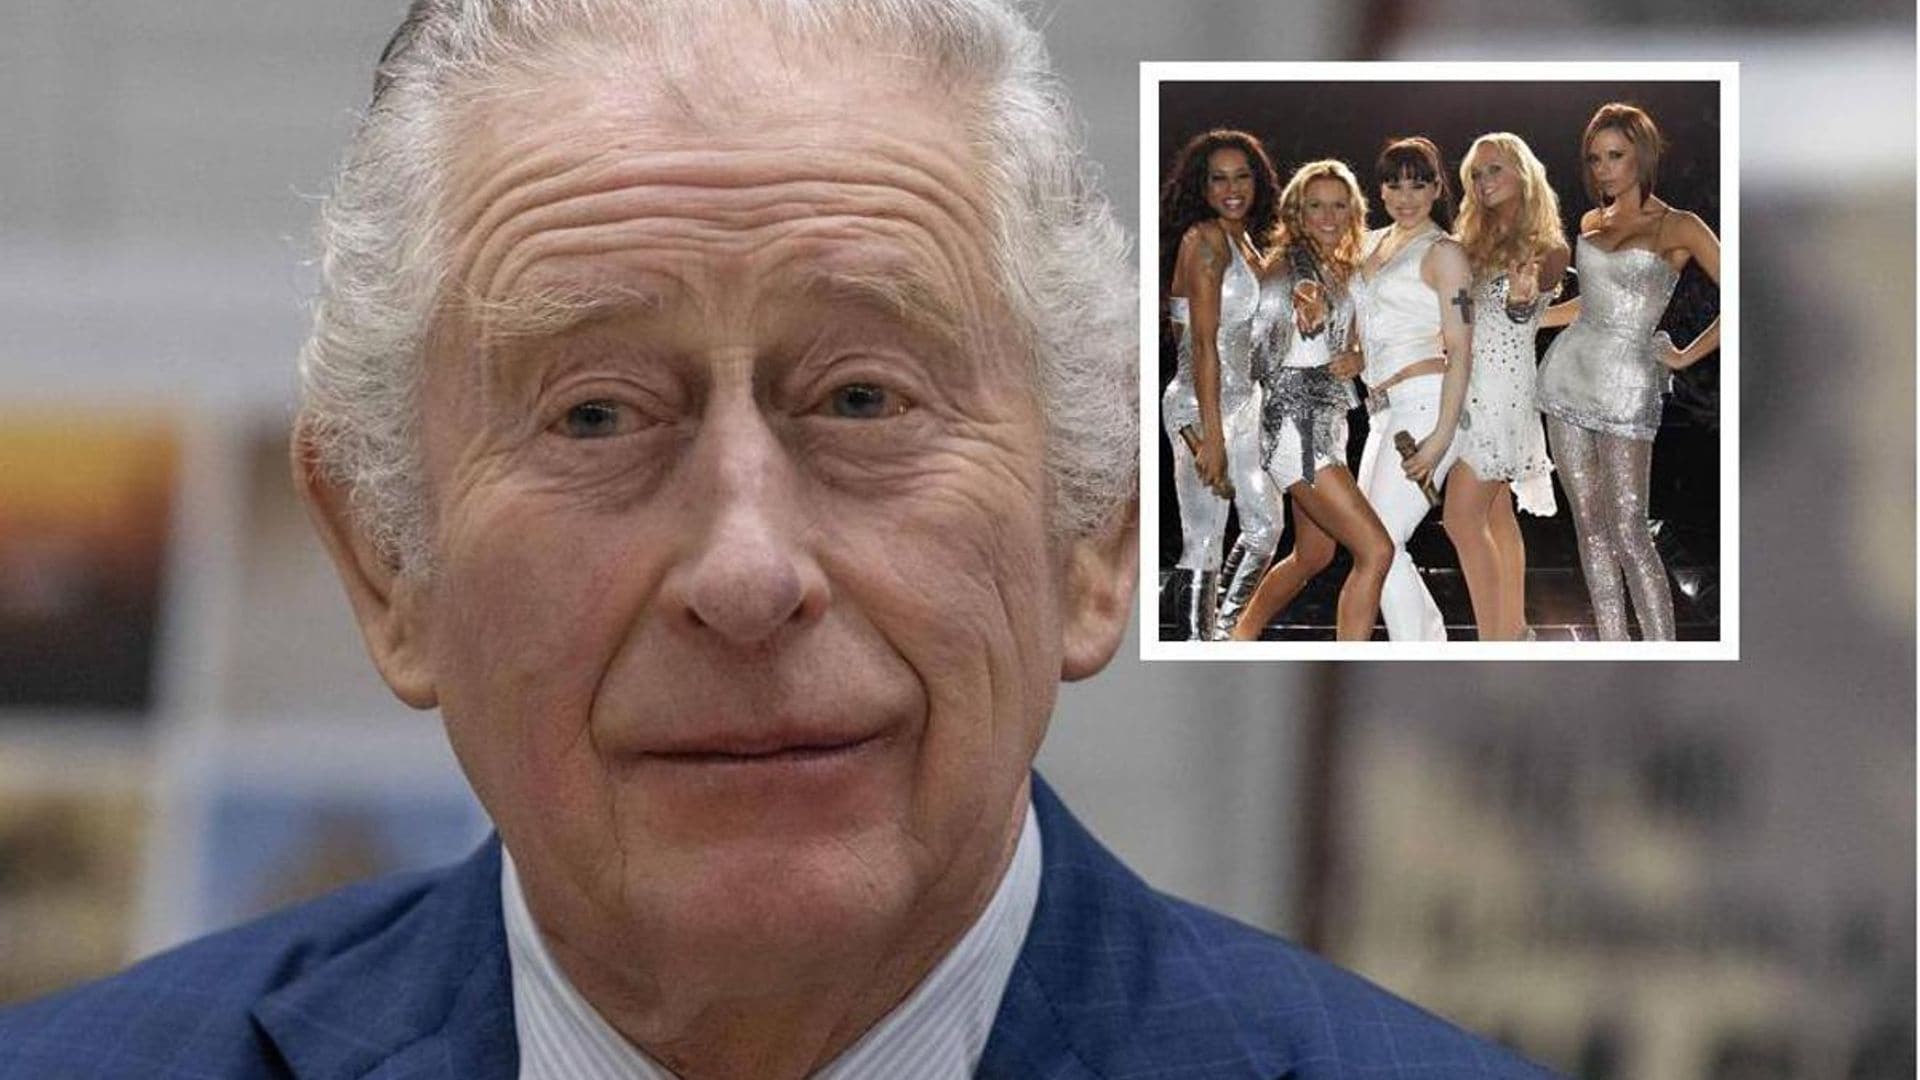 Could the Spice Girls reunite for King Charles III coronation concert?